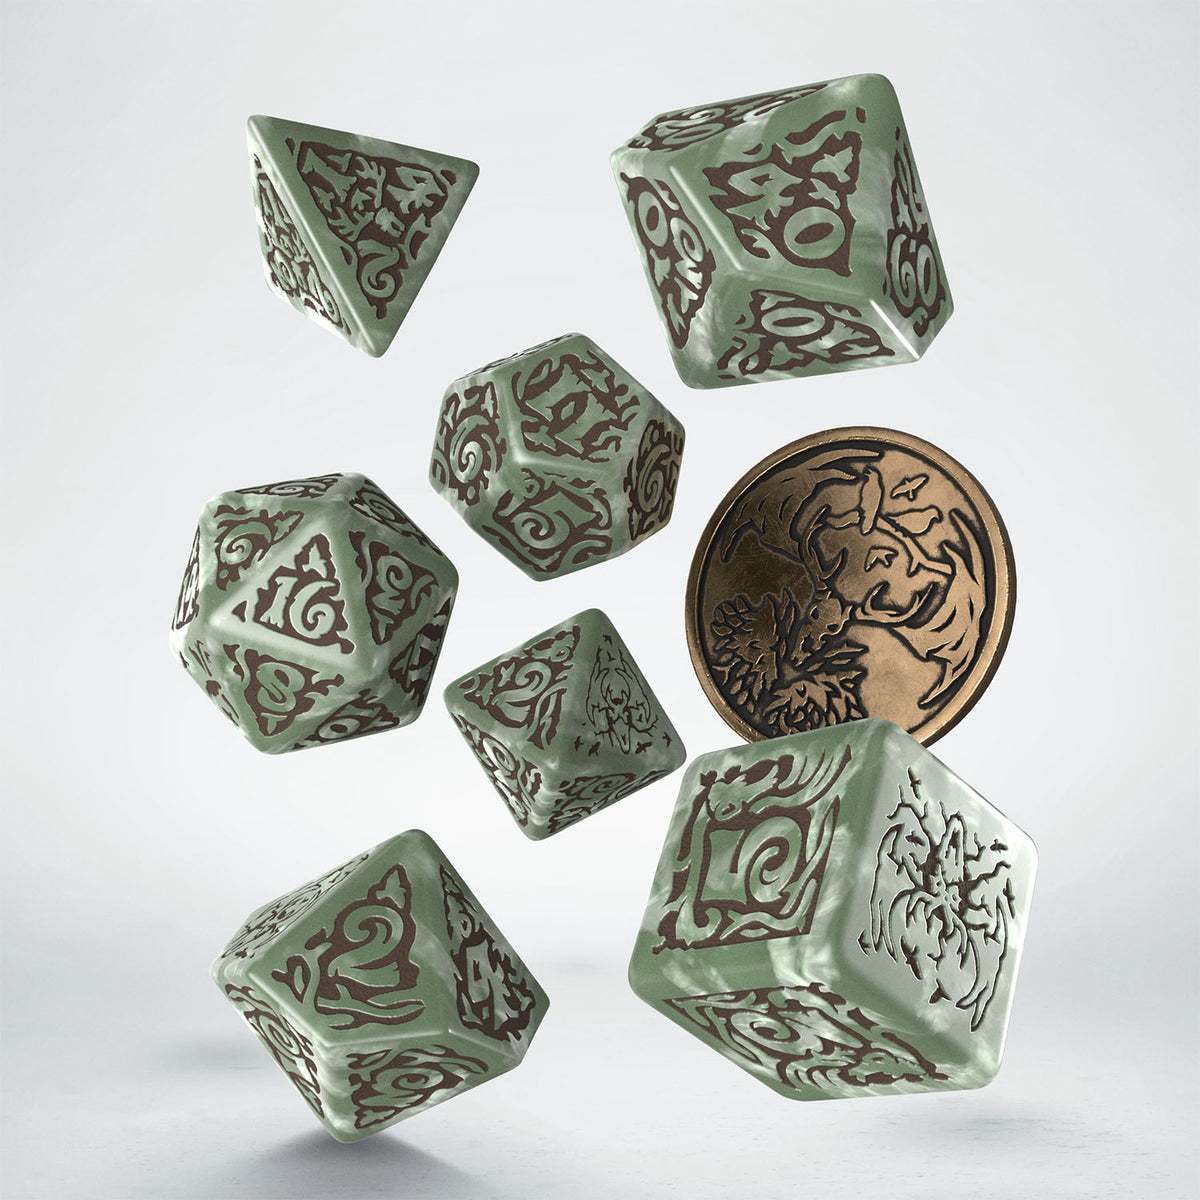 Q Workshop - The Witcher Dice Set Leshen - Totem Builder Dice Set 7 With Coin